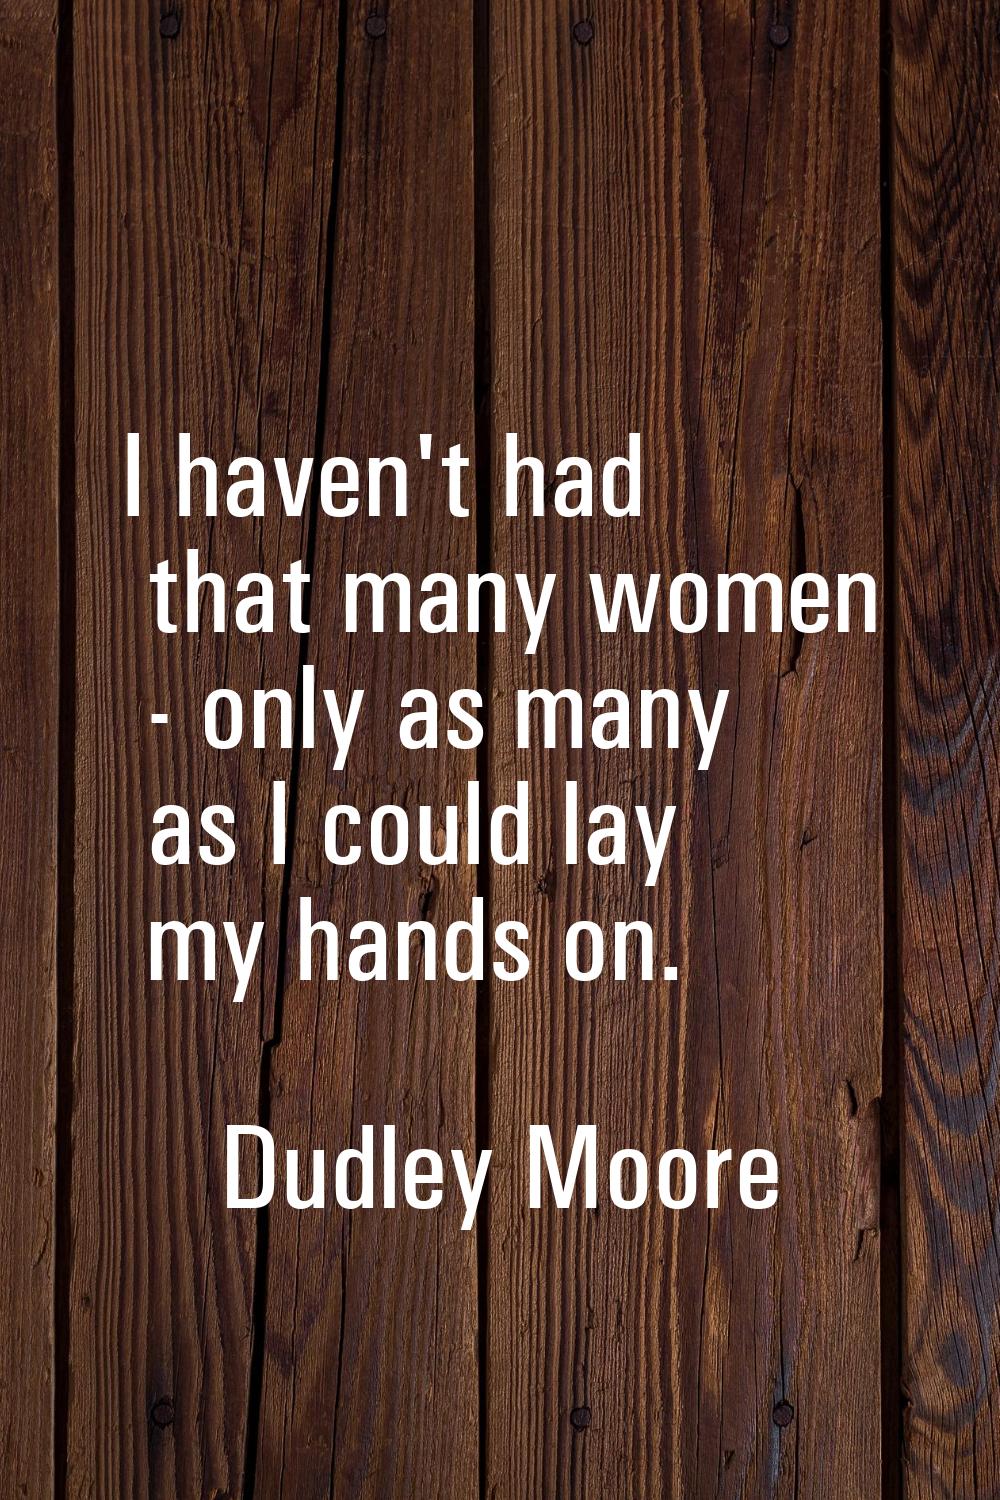 I haven't had that many women - only as many as I could lay my hands on.